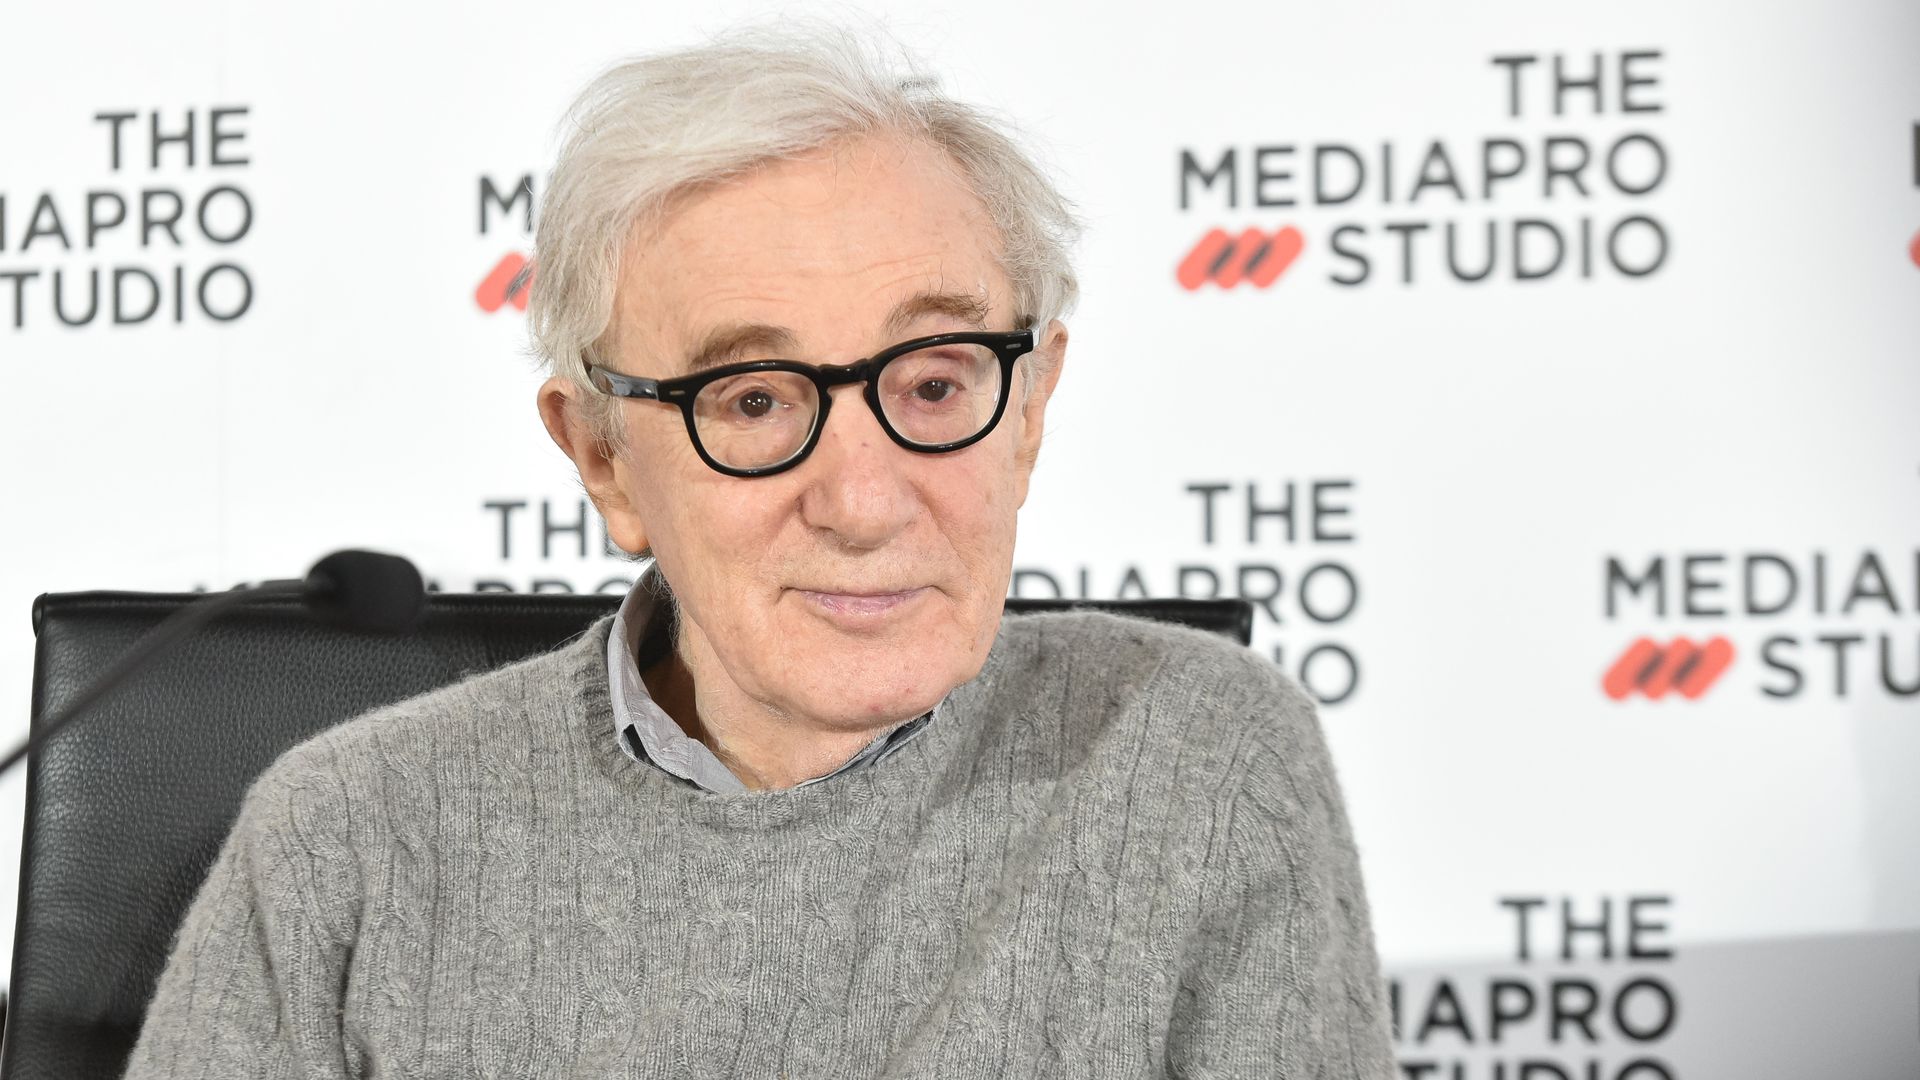 In this image, Woody Allen sits in a sweater